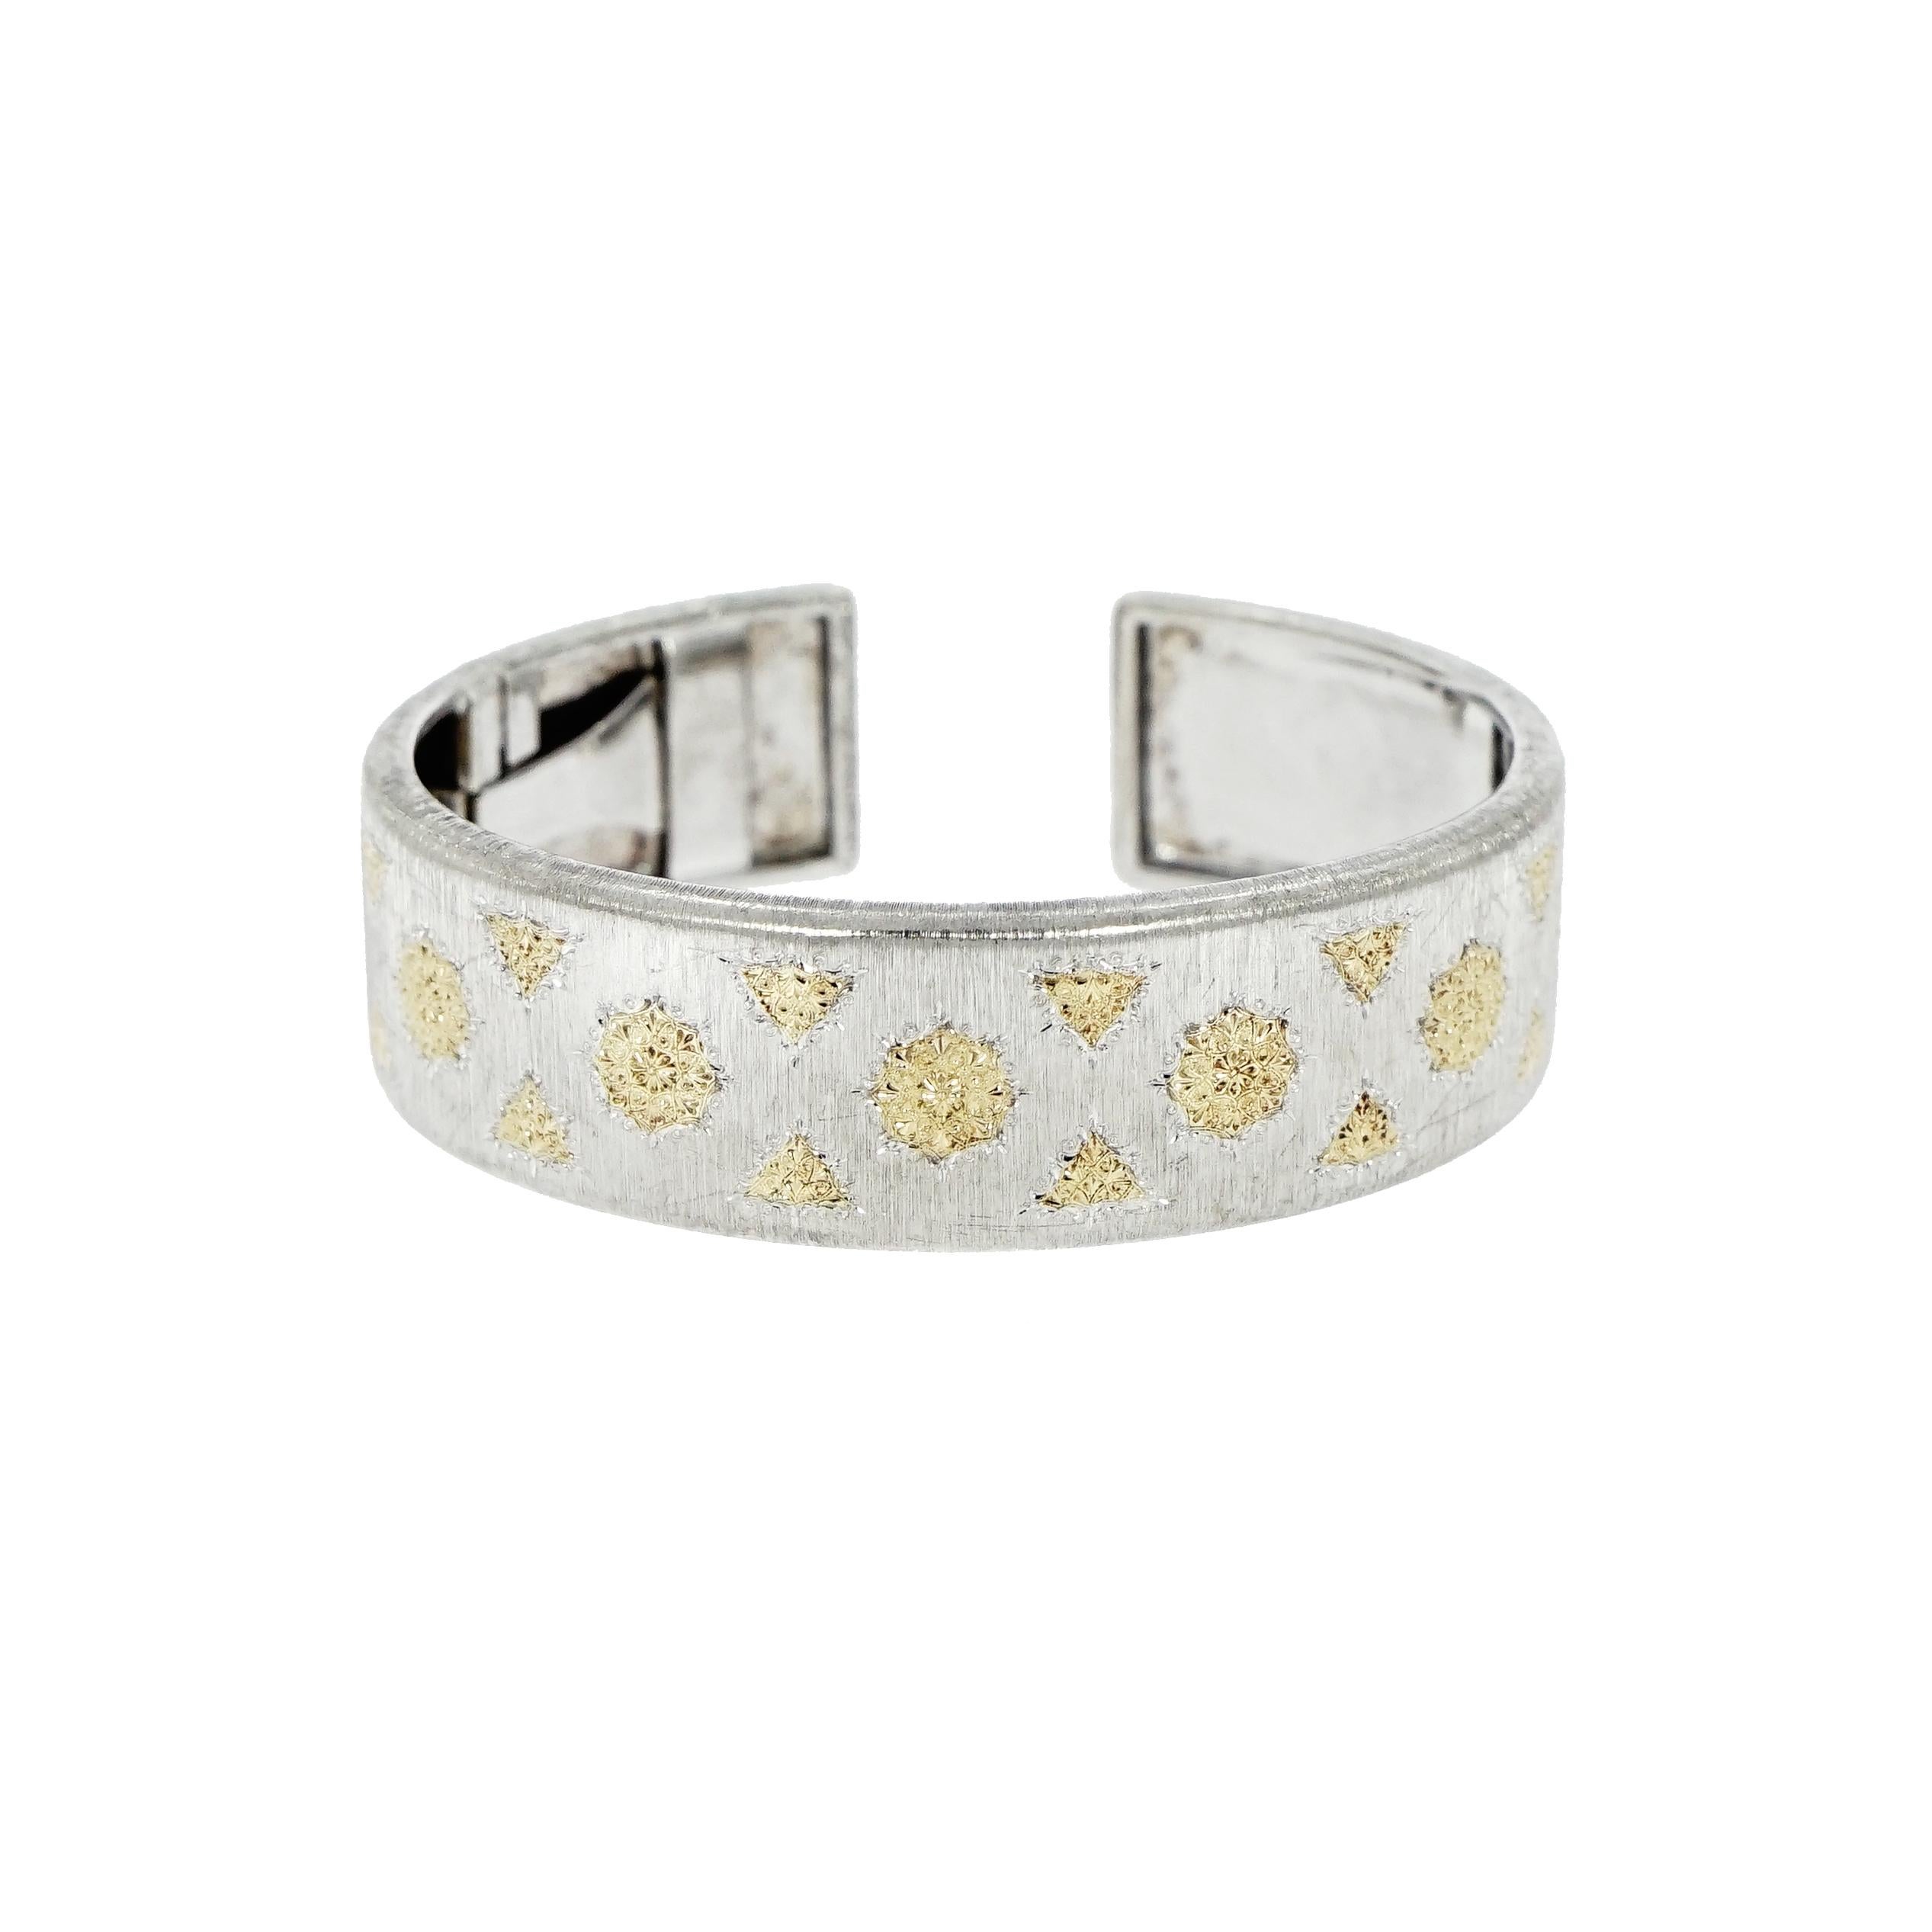 Gianmaria Buccellati Open Cuff Bracelet, handcrafted in Sterling Silver and decorated with 18K yellow gold accents.
The cuff Measures: 58mm x 48mm
Width: 18mm 
Weight: 38.10 grams
Marked:  Gianmaria Buccellati, Italy, 925 
